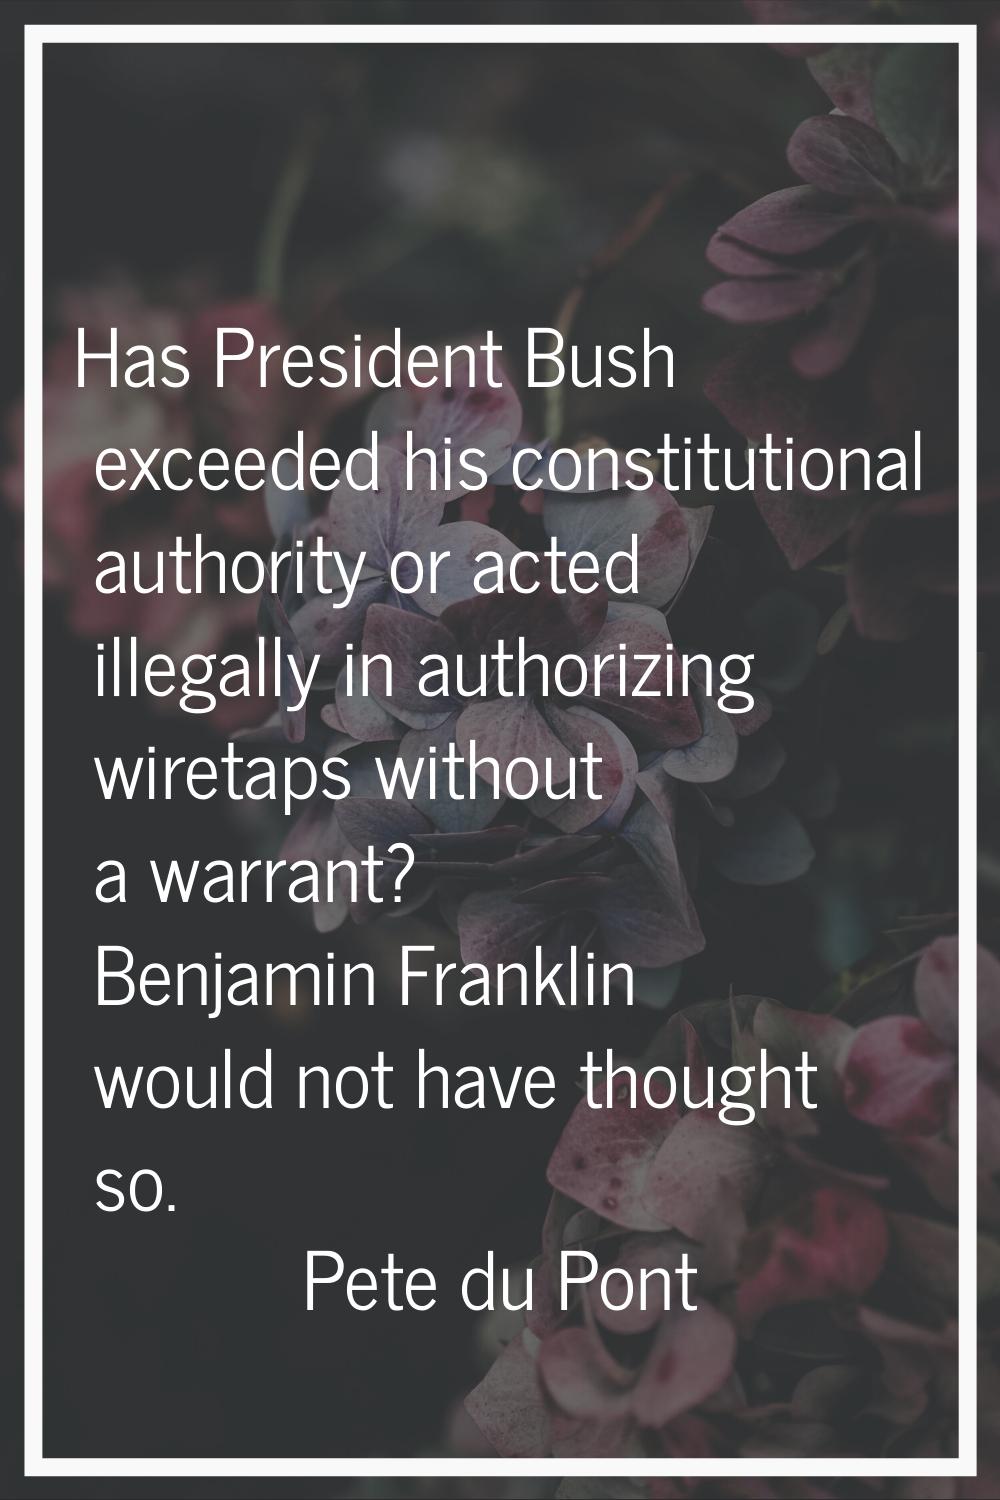 Has President Bush exceeded his constitutional authority or acted illegally in authorizing wiretaps